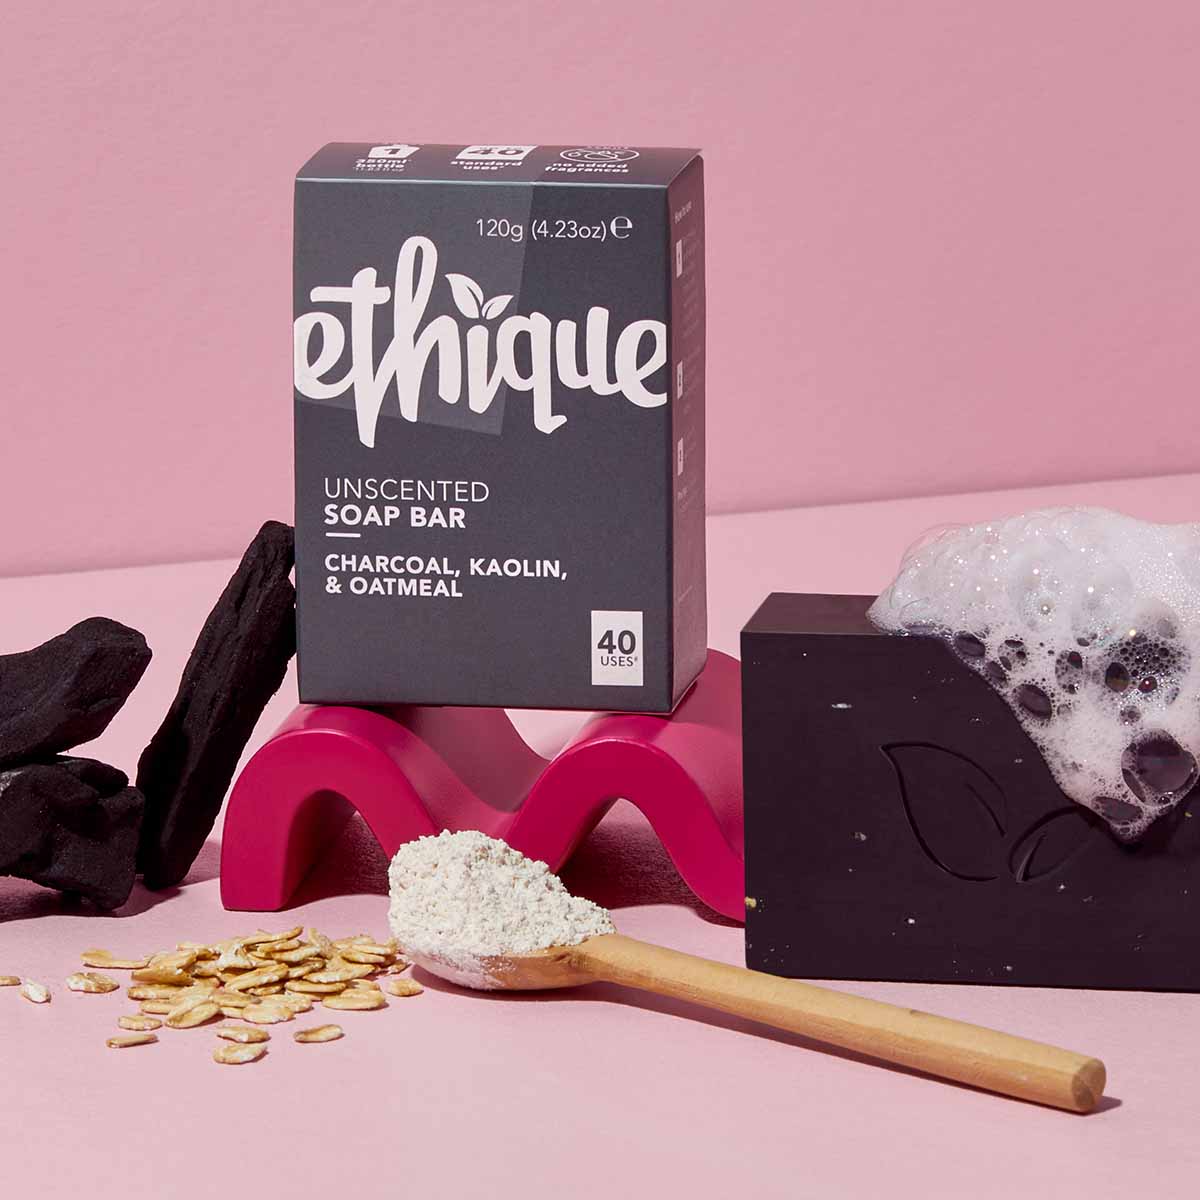 Ethique Unscented Charcoal, Kaolin, & Oatmeal Soap Bar-The Living Co.